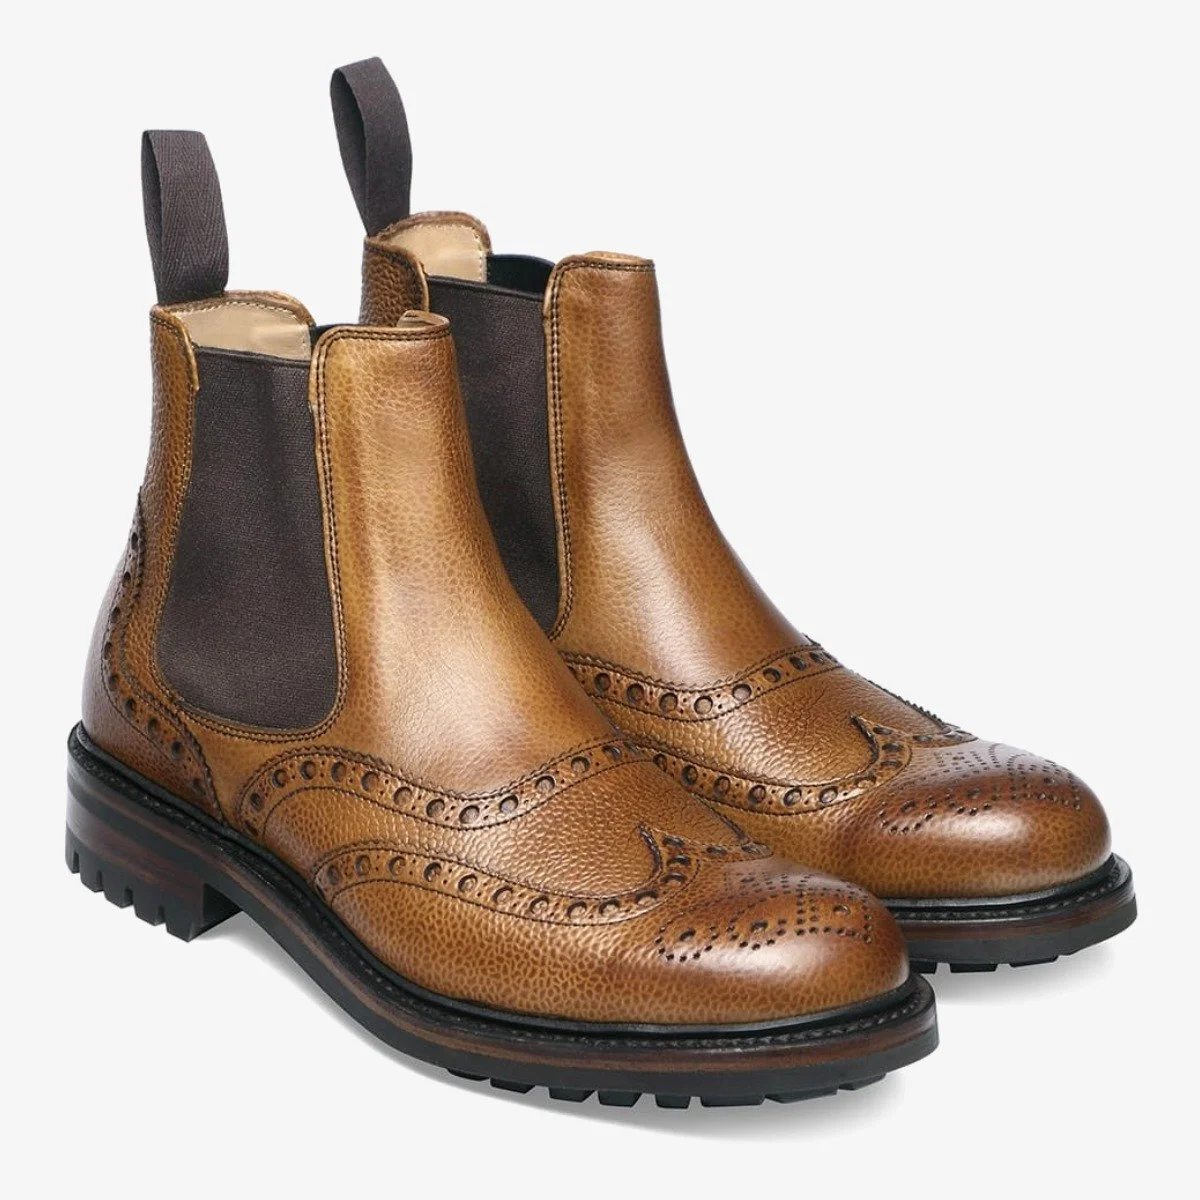 Cheaney Tamar almond brogue Chelsea boots